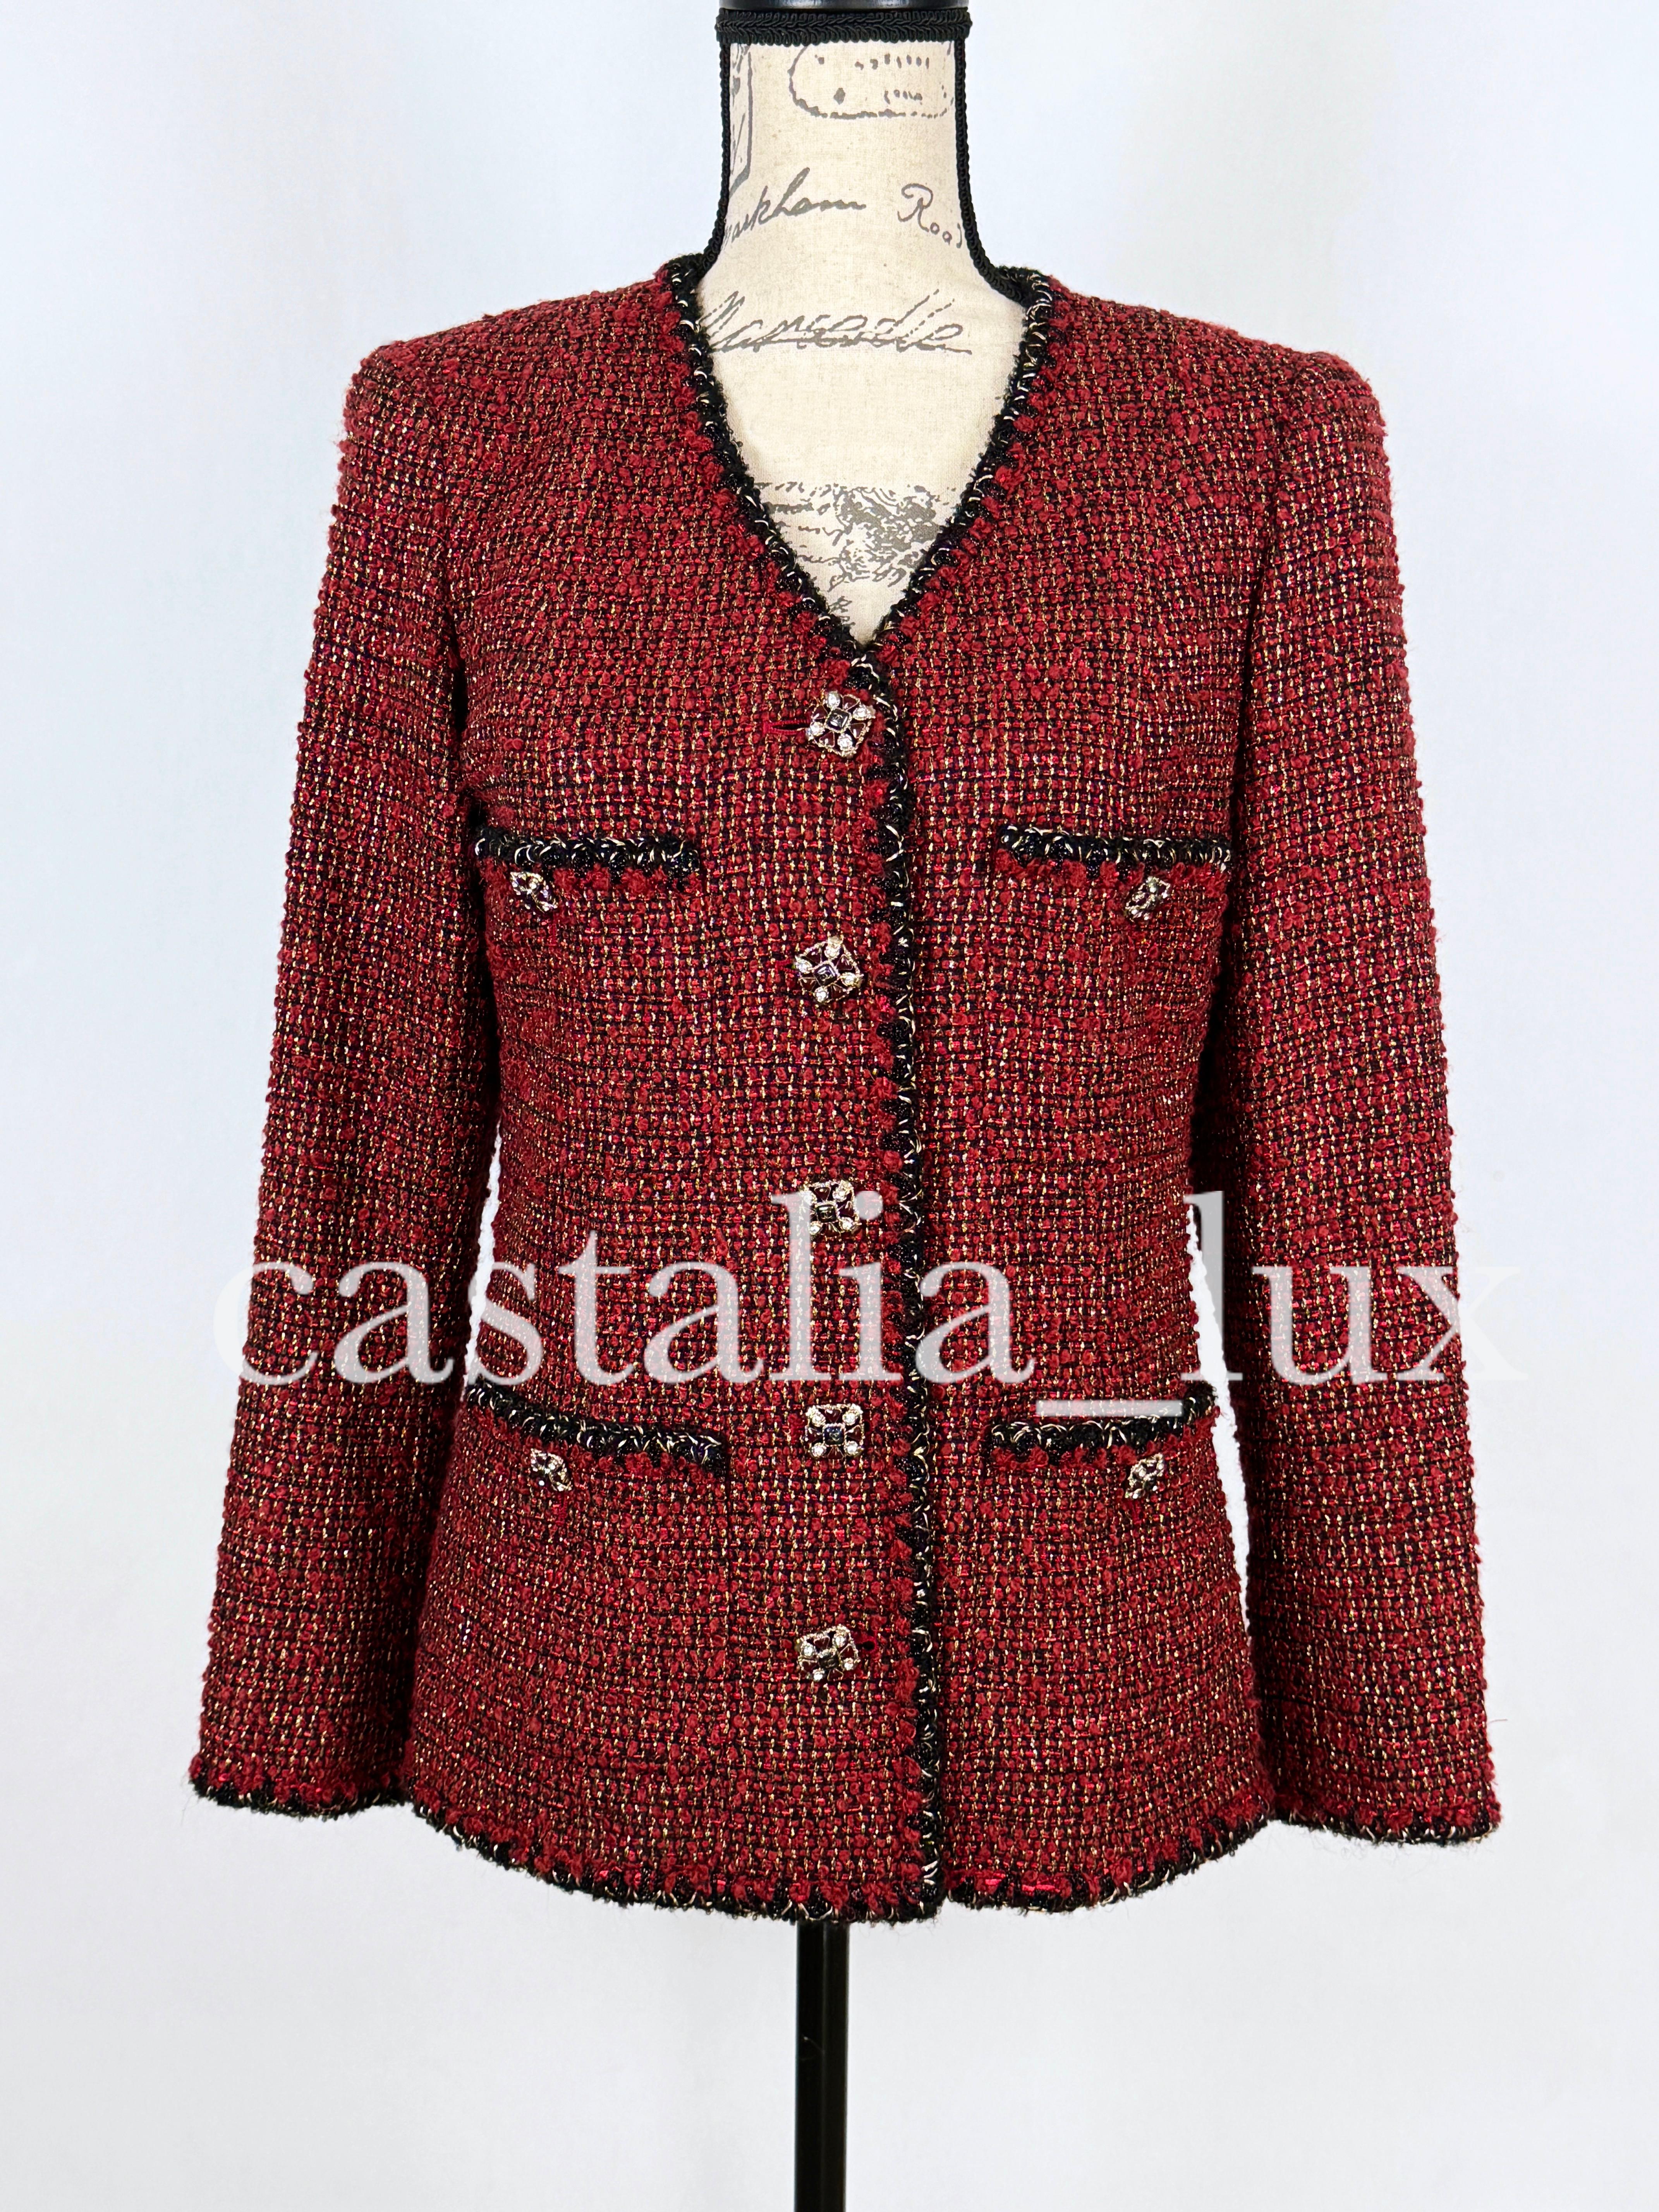 Chanel New Iconic CC Jewel Buttons Lesage Tweed Jacket For Sale 5